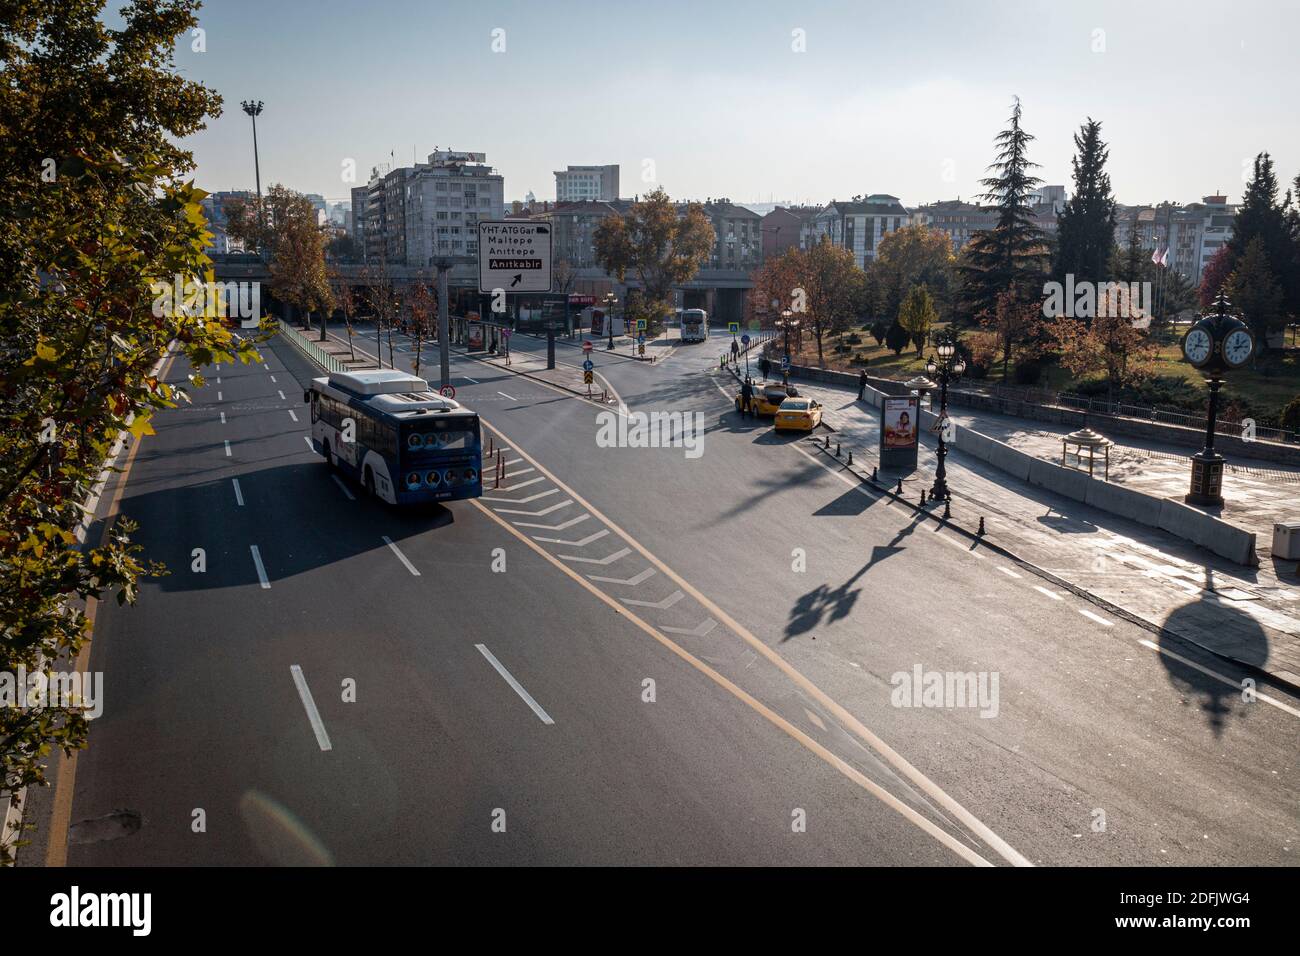 Atatürk Boulevard, one of the busiest routes in Ankara seen almost empty during the curfew.As a measure taken against the spread of covid 19, Turkey declared a curfew on Saturdays and Sundays excluding transportation services and hospital operations. Police fines 3100 Turkish Liras (TL) to those that don’t obey. Stock Photo